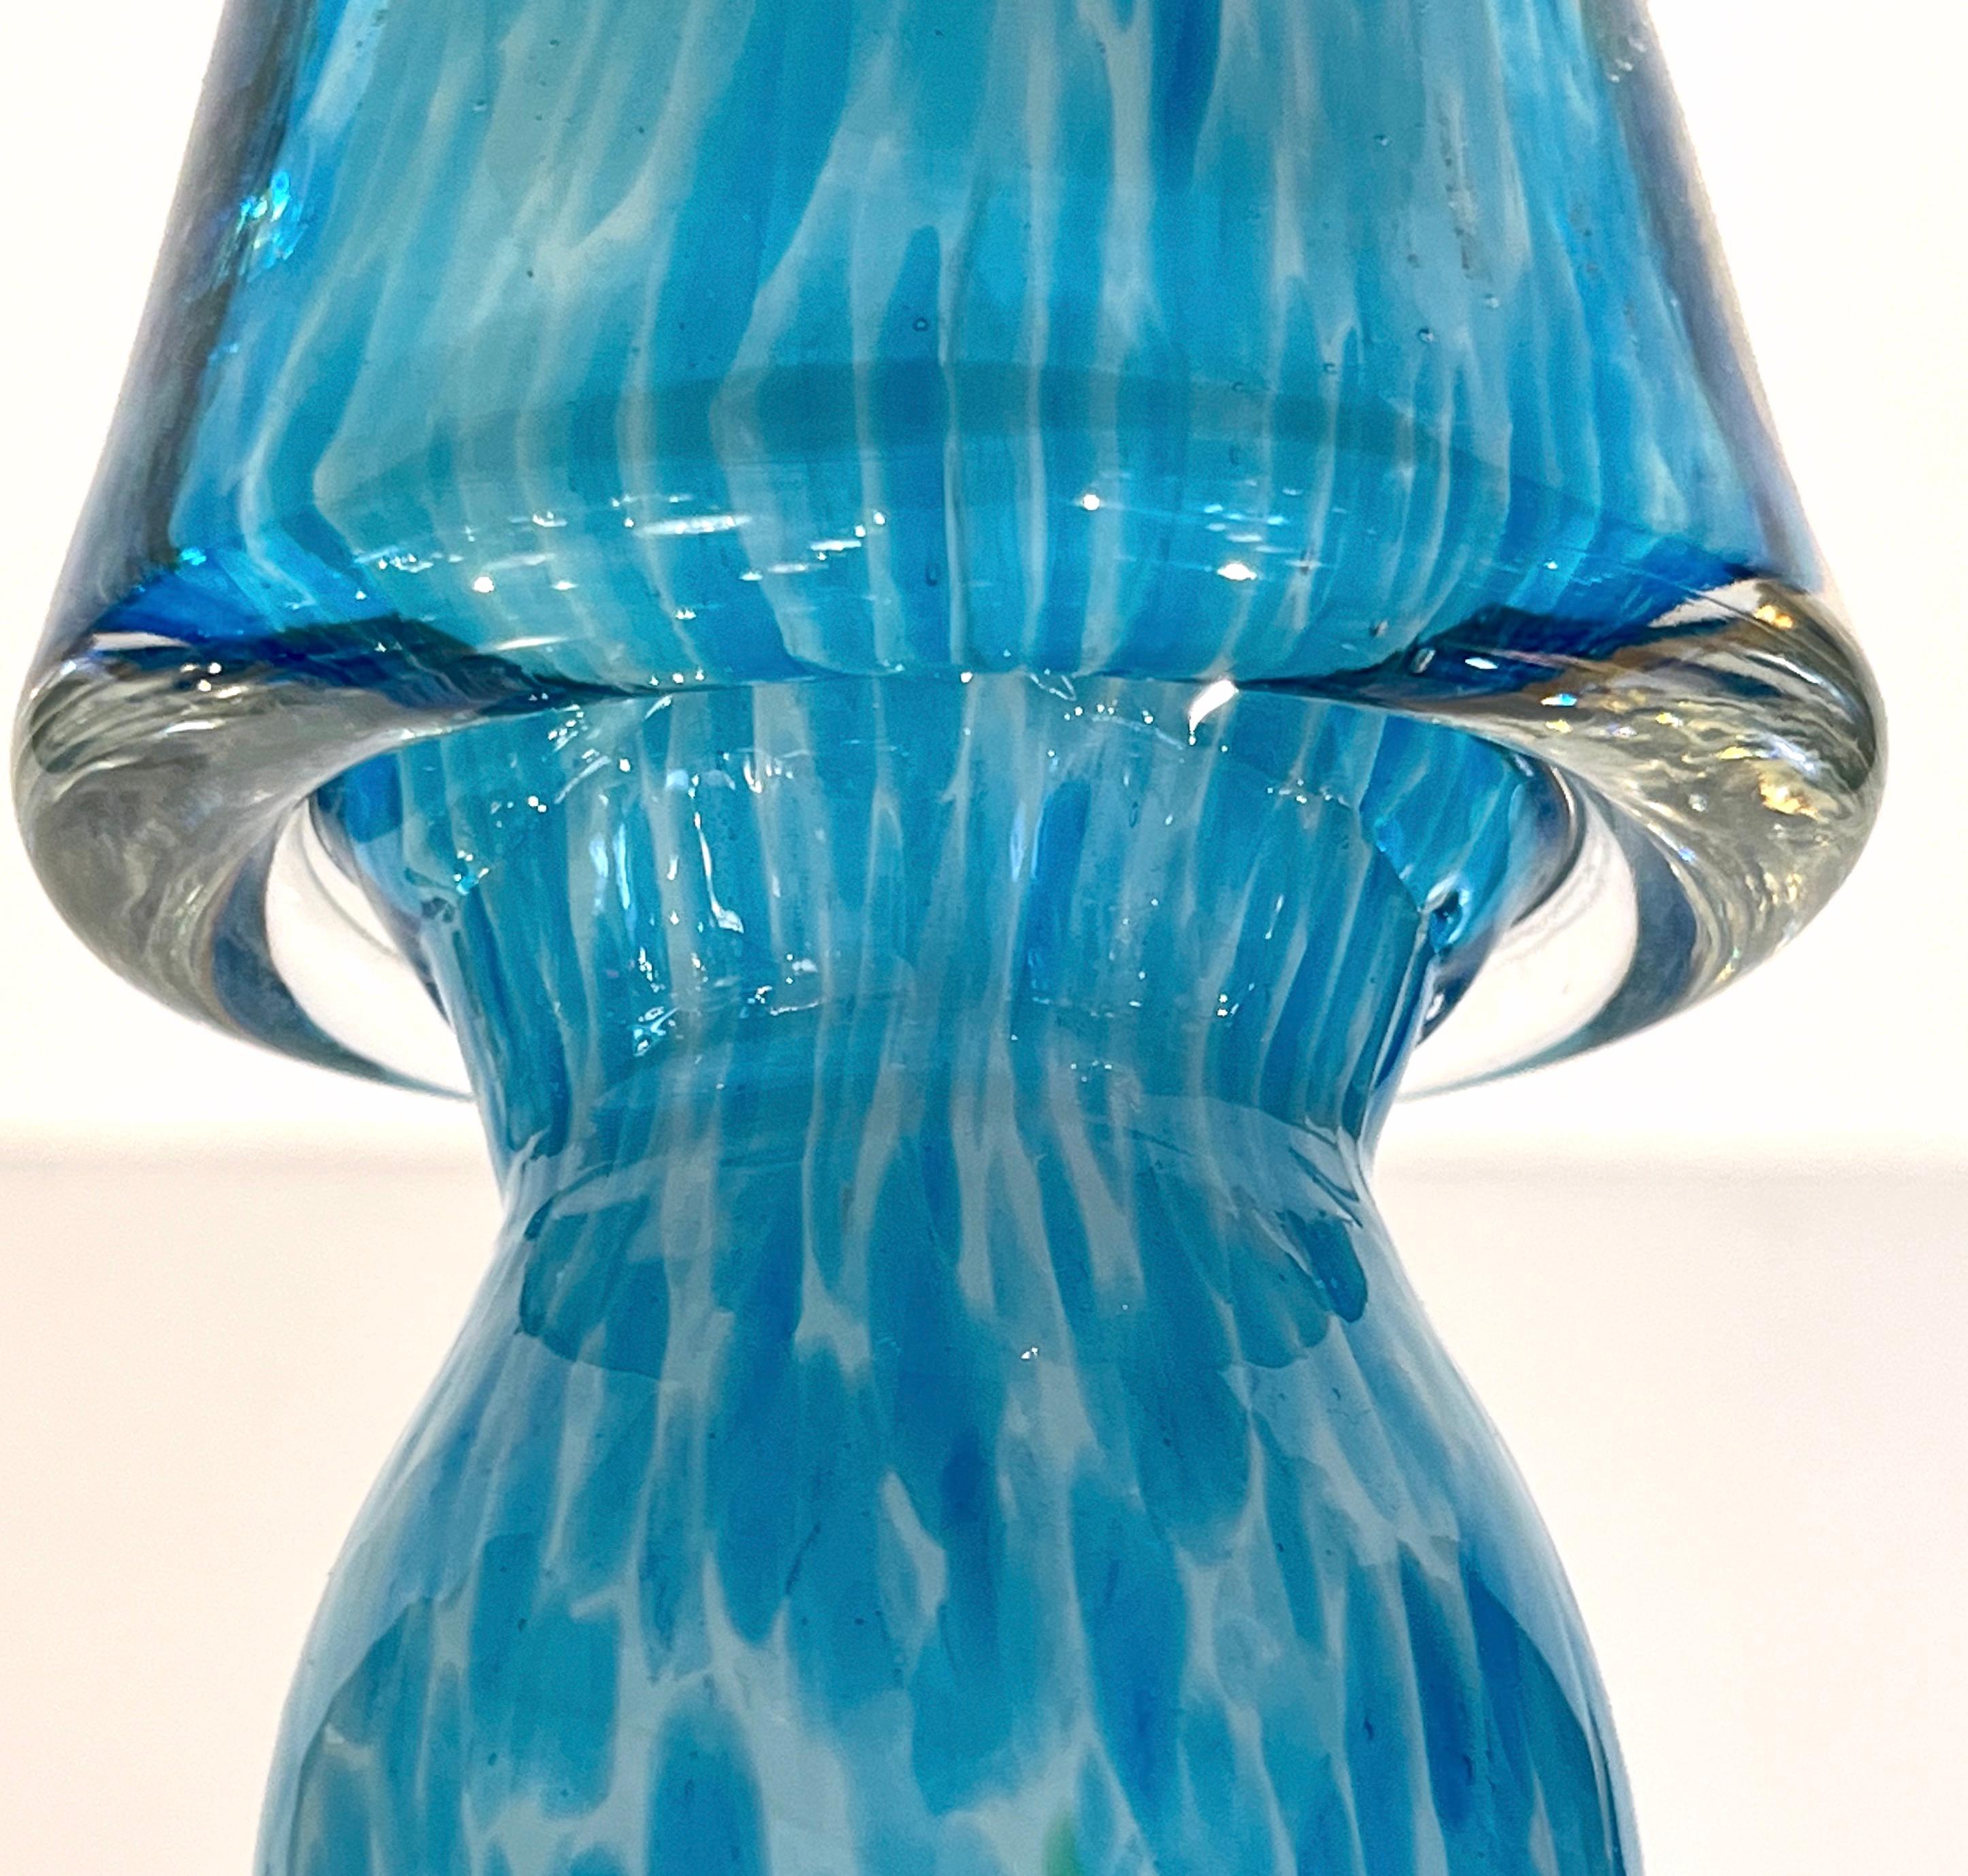 Formia 1980s Italian Vintage Turquoise Blue & White Murano Glass Tree Sculpture In Excellent Condition For Sale In New York, NY